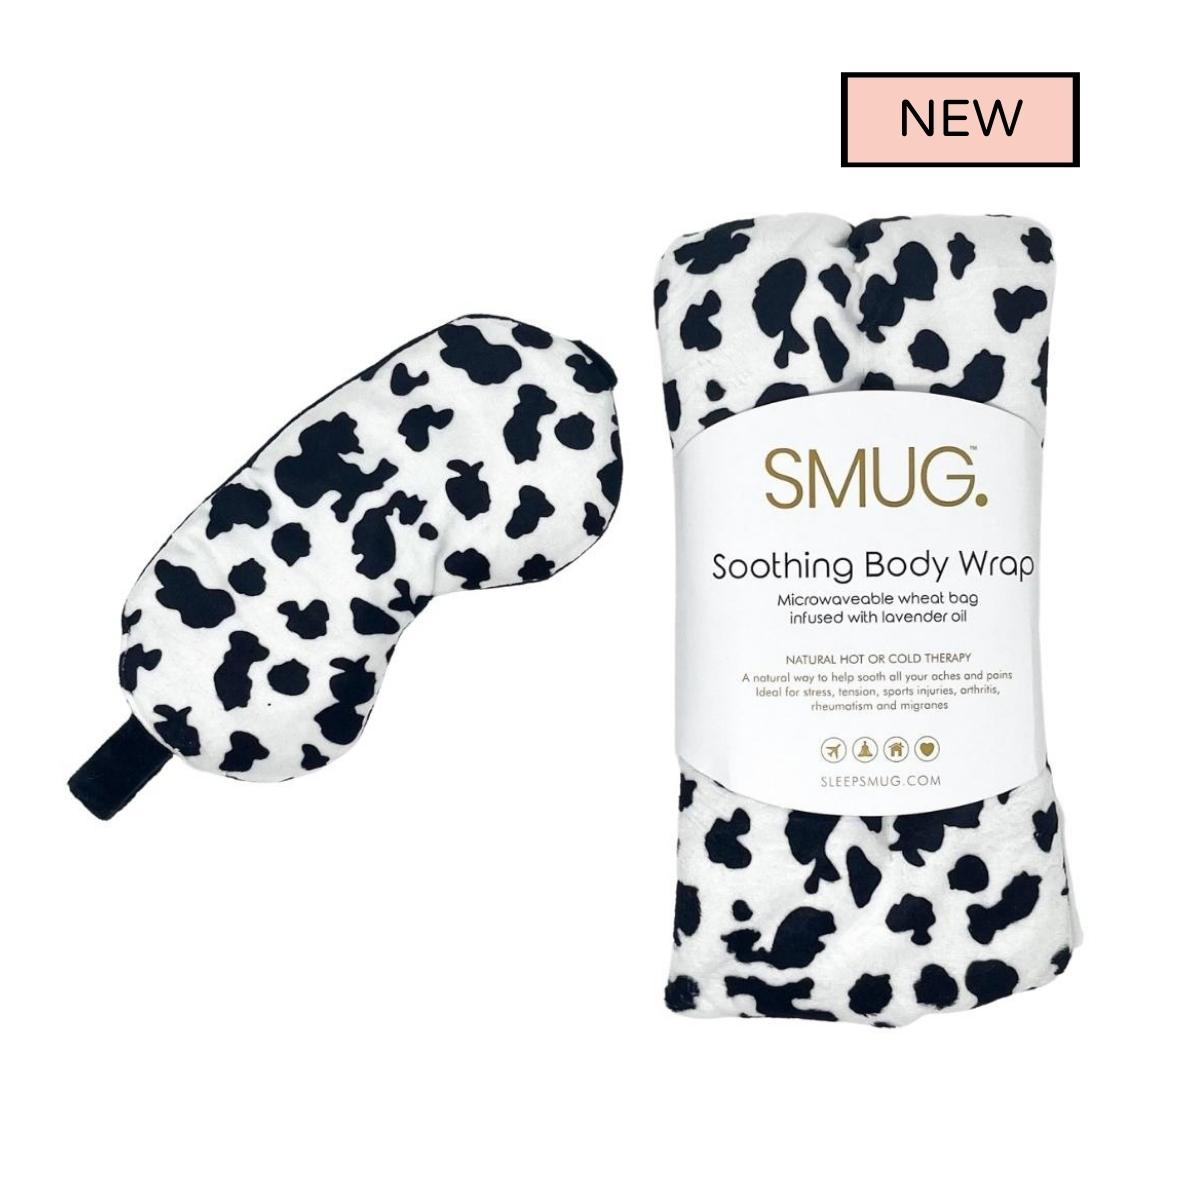 Deep Pressure Therapy Eye Mask & Soothing Body Wrap Set - Cow Print